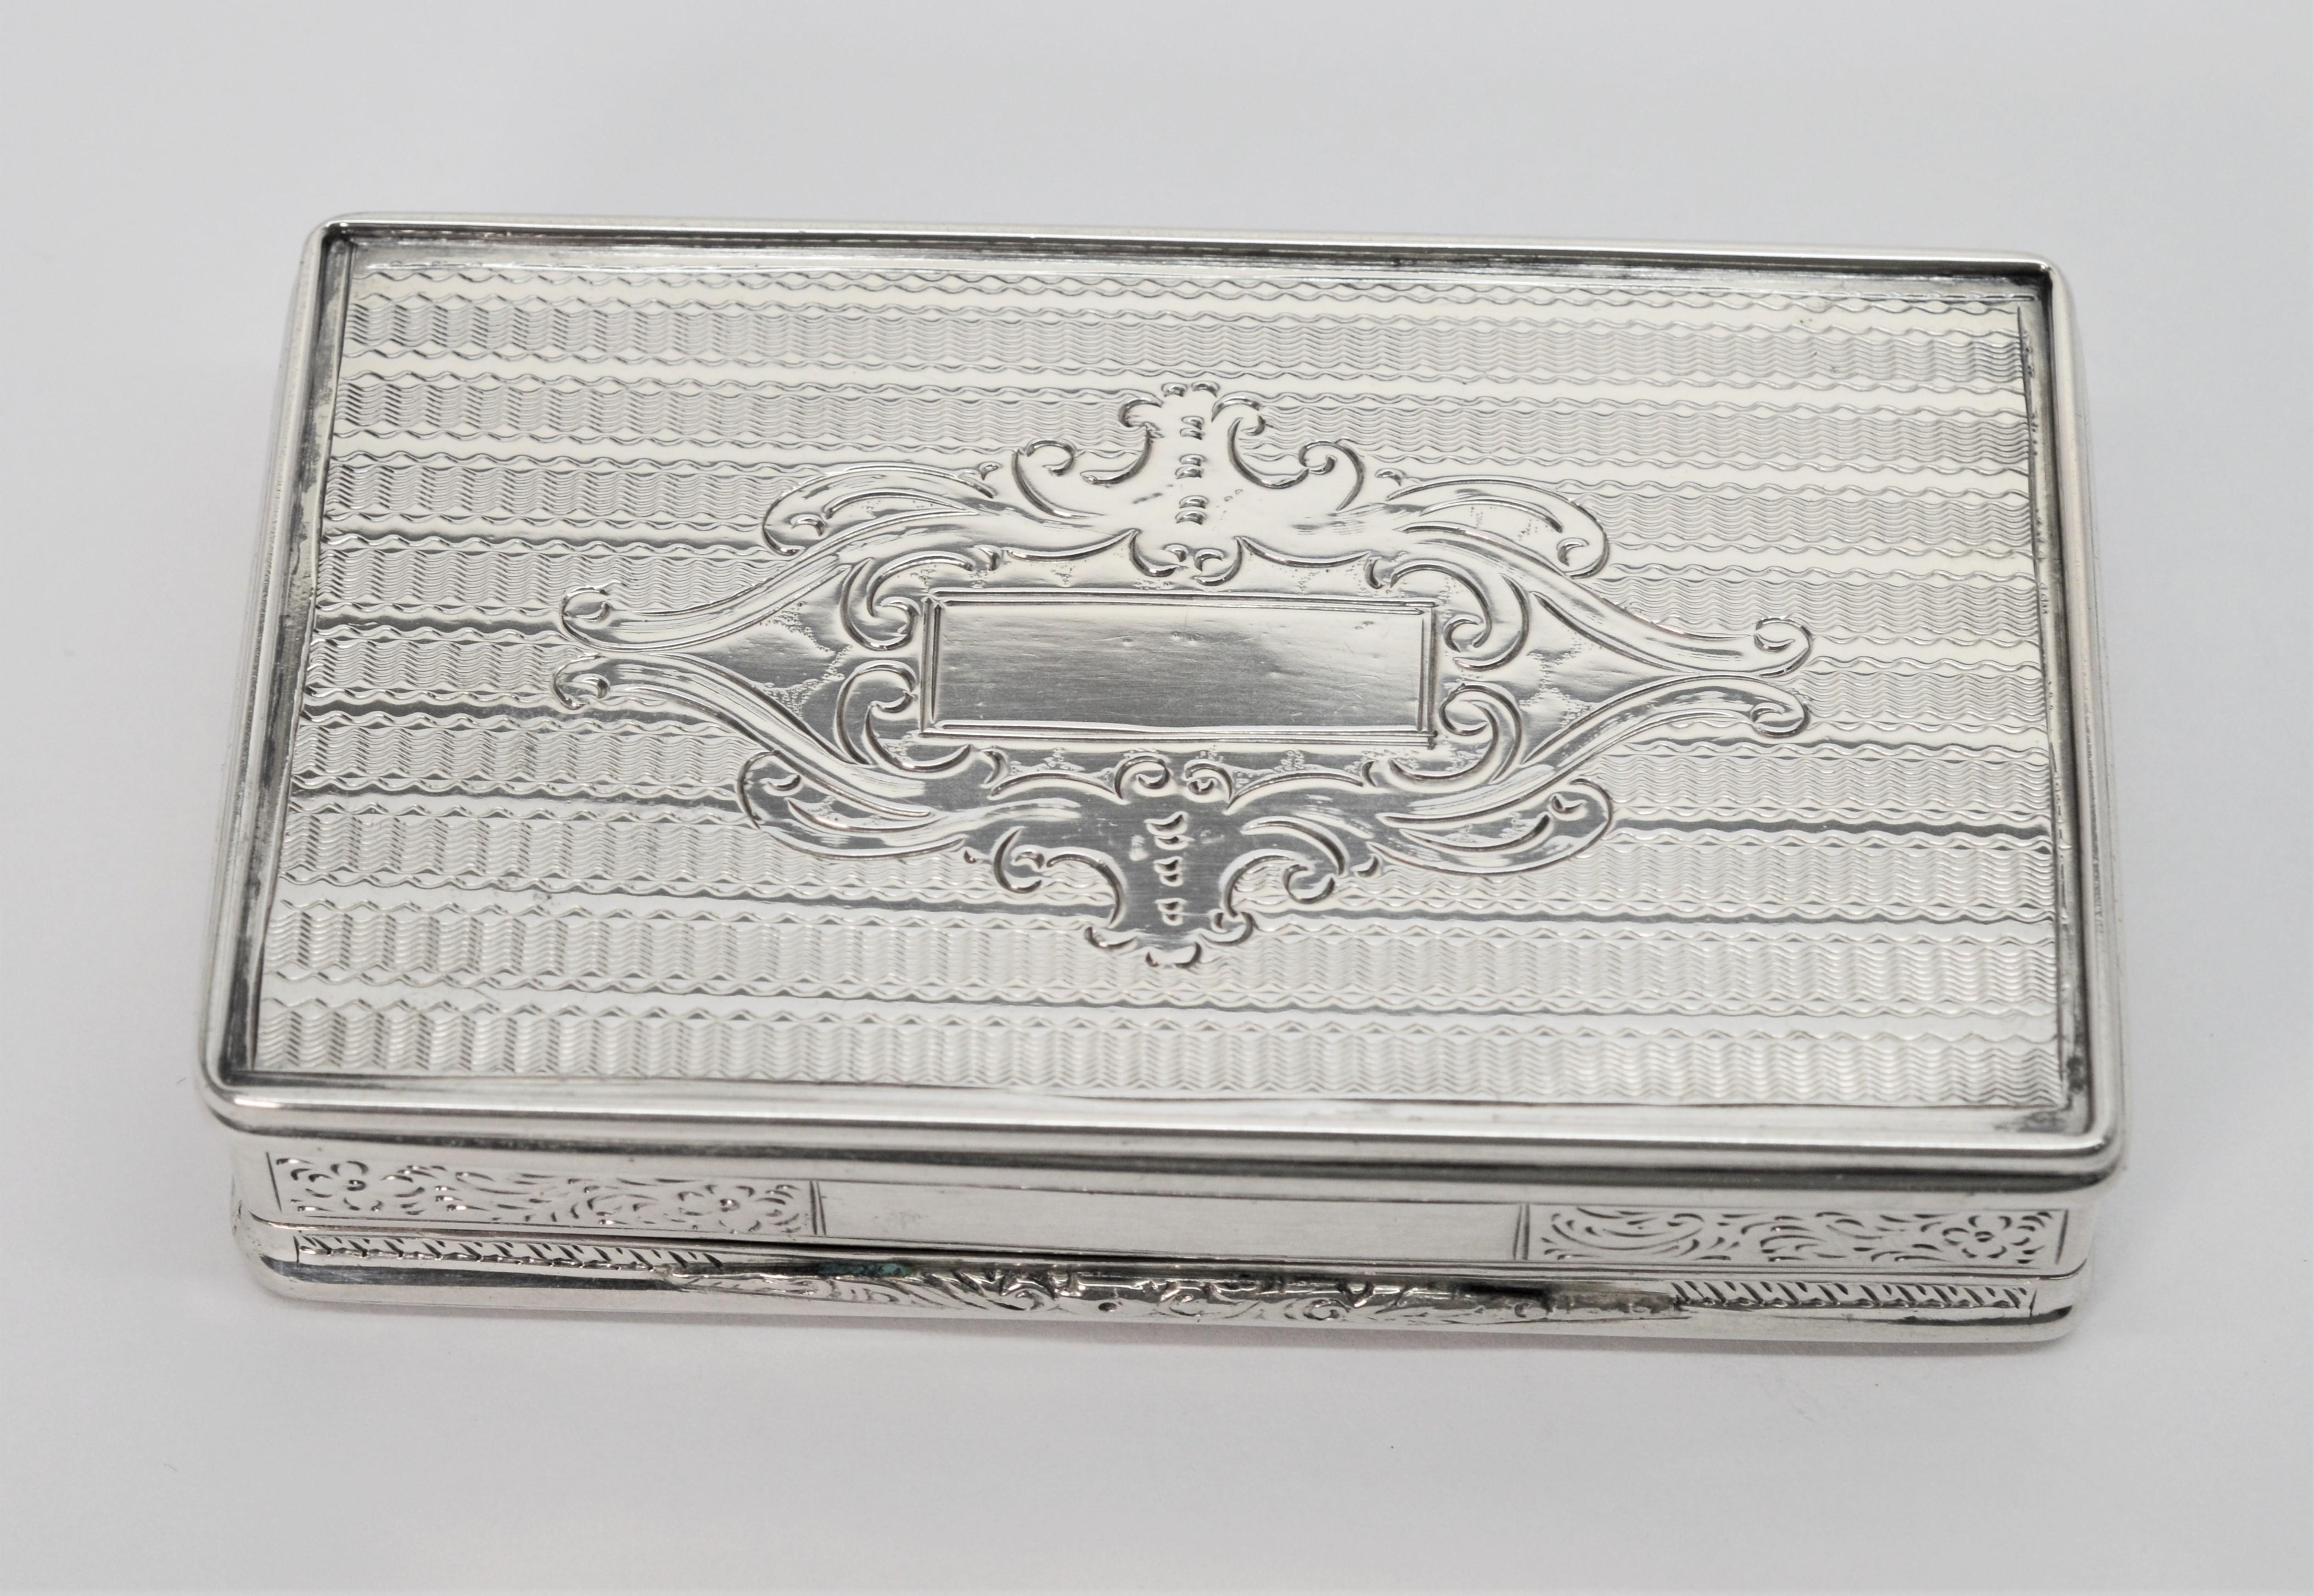 This spectacular heirloom piece has made its journey forward from the Victorian period. Made of .800 silver, the cigarette or snuff box is stamped with hallmarks, dated 1859 and signed IFH. The piece is hand engraved with a decorative design on all